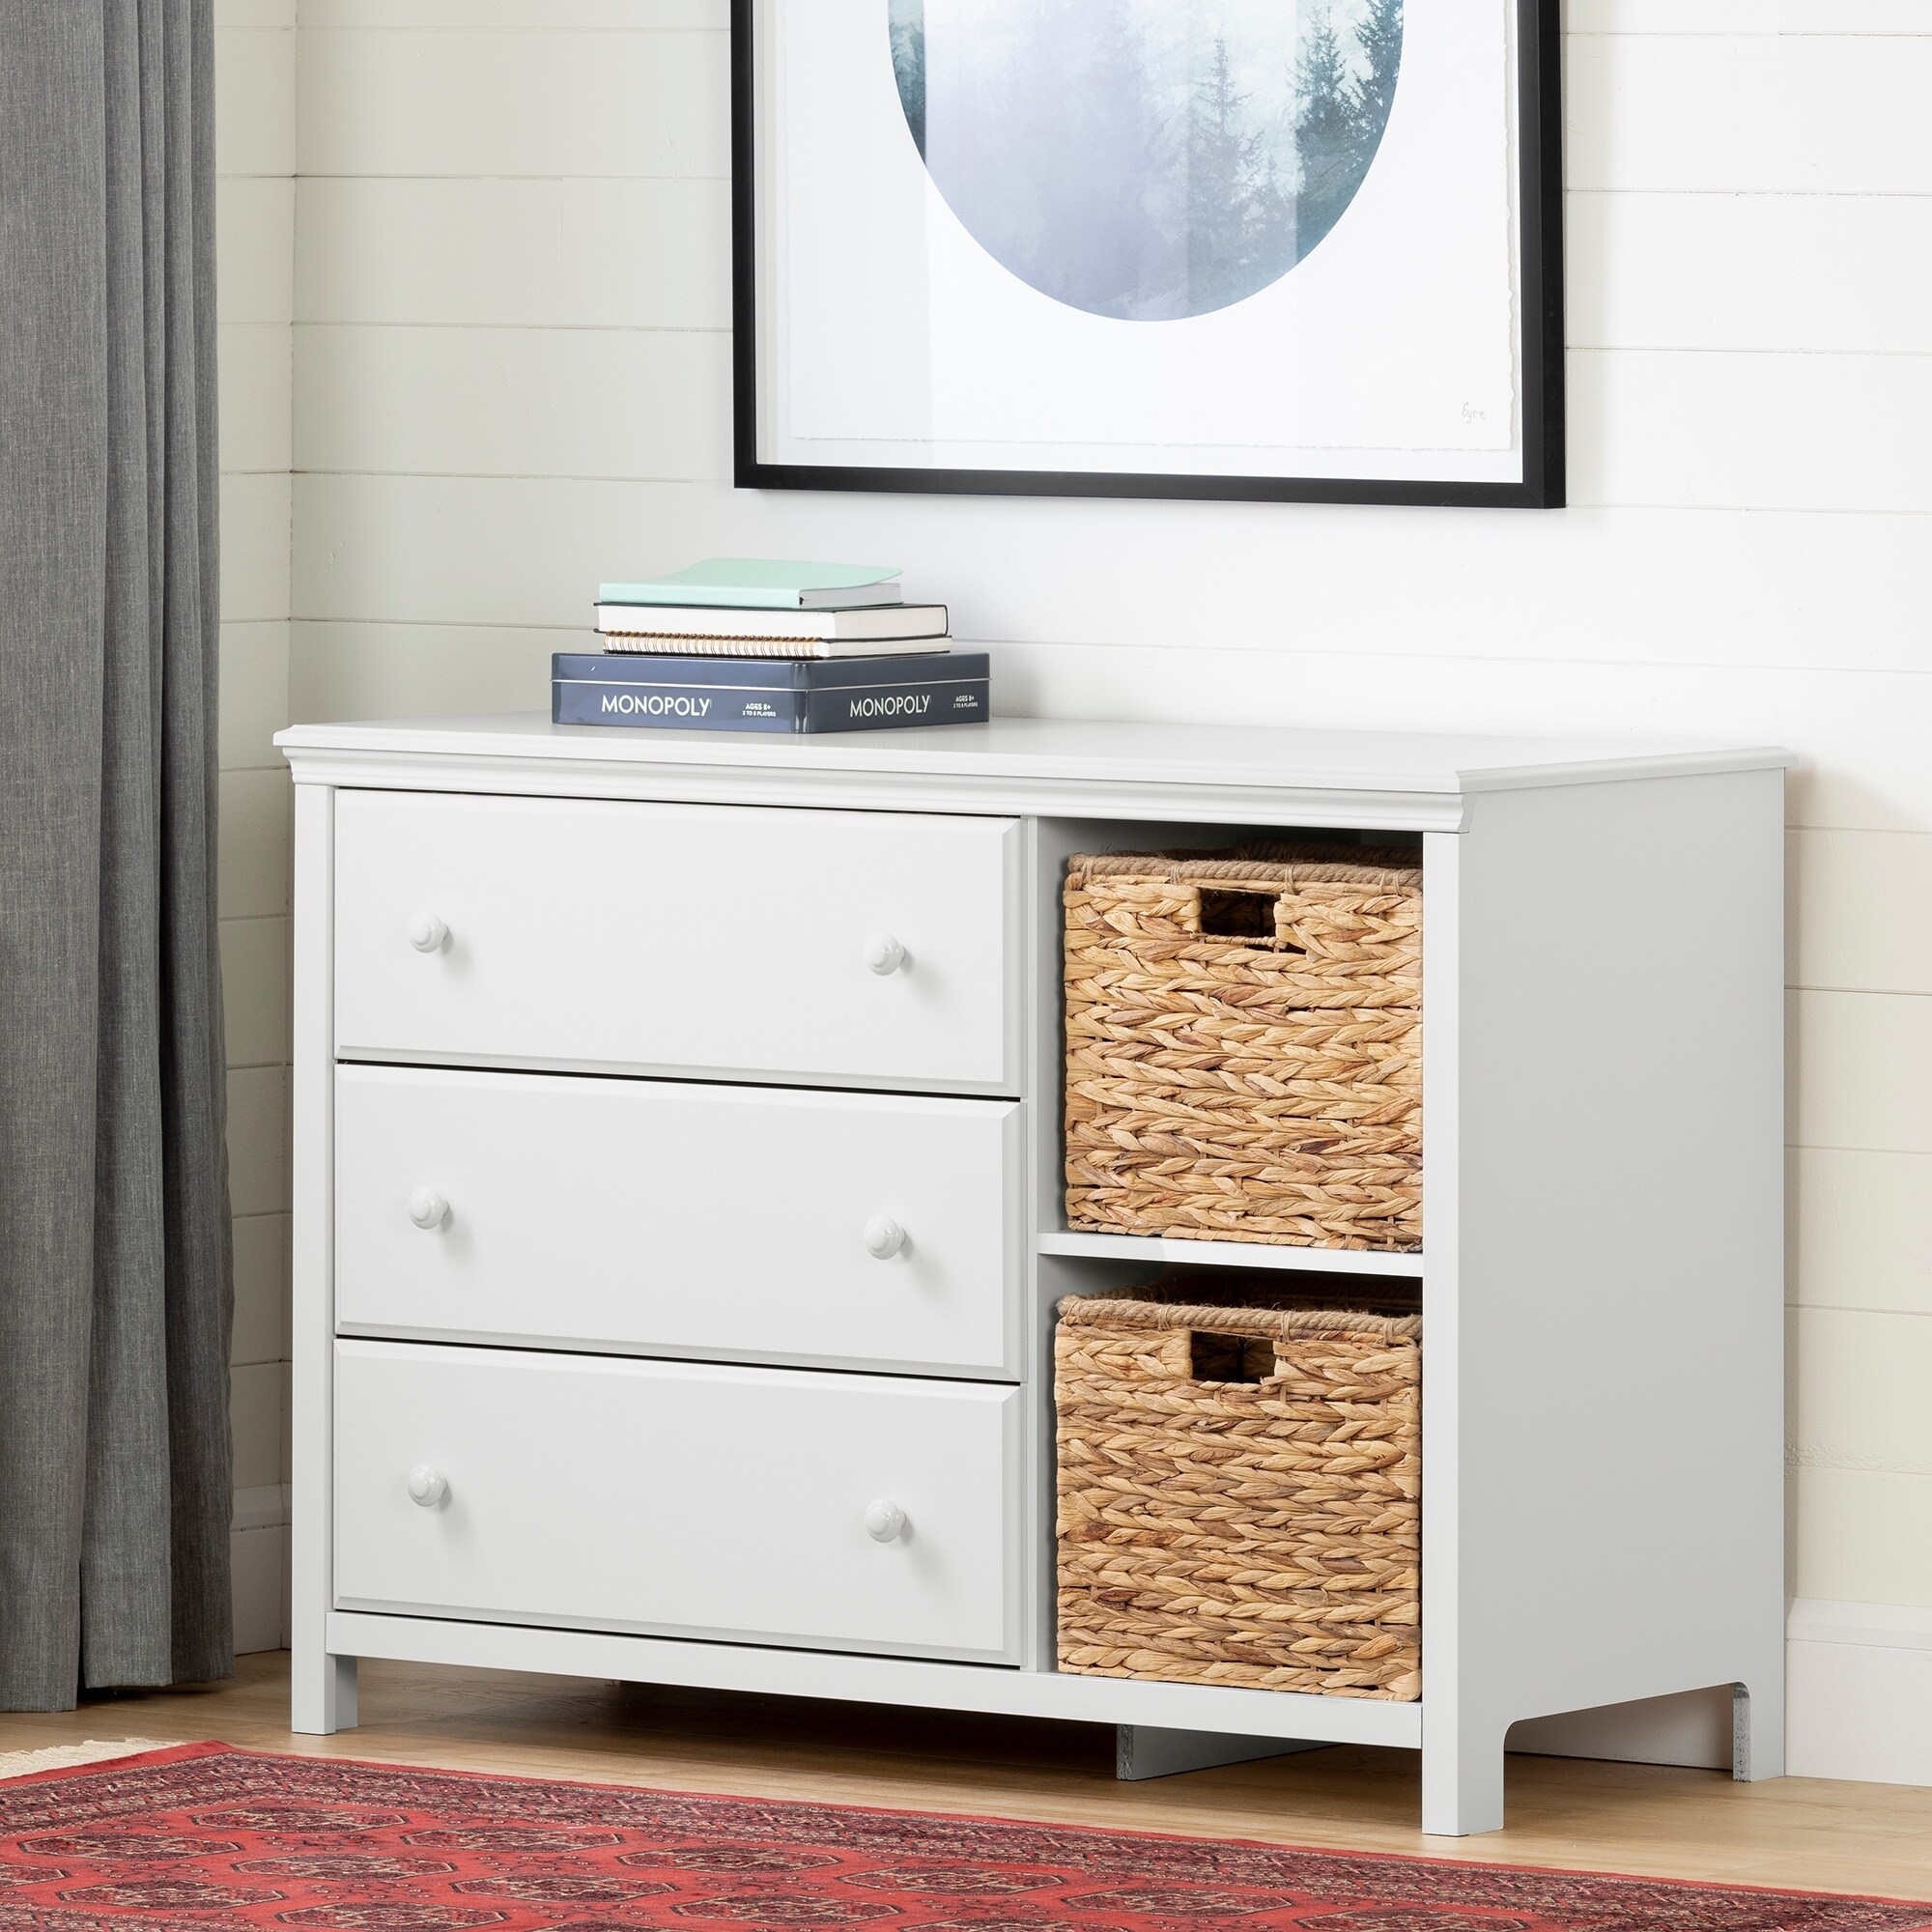 Shop South Shore Cotton Candy 3 Drawer Dresser With Baskets